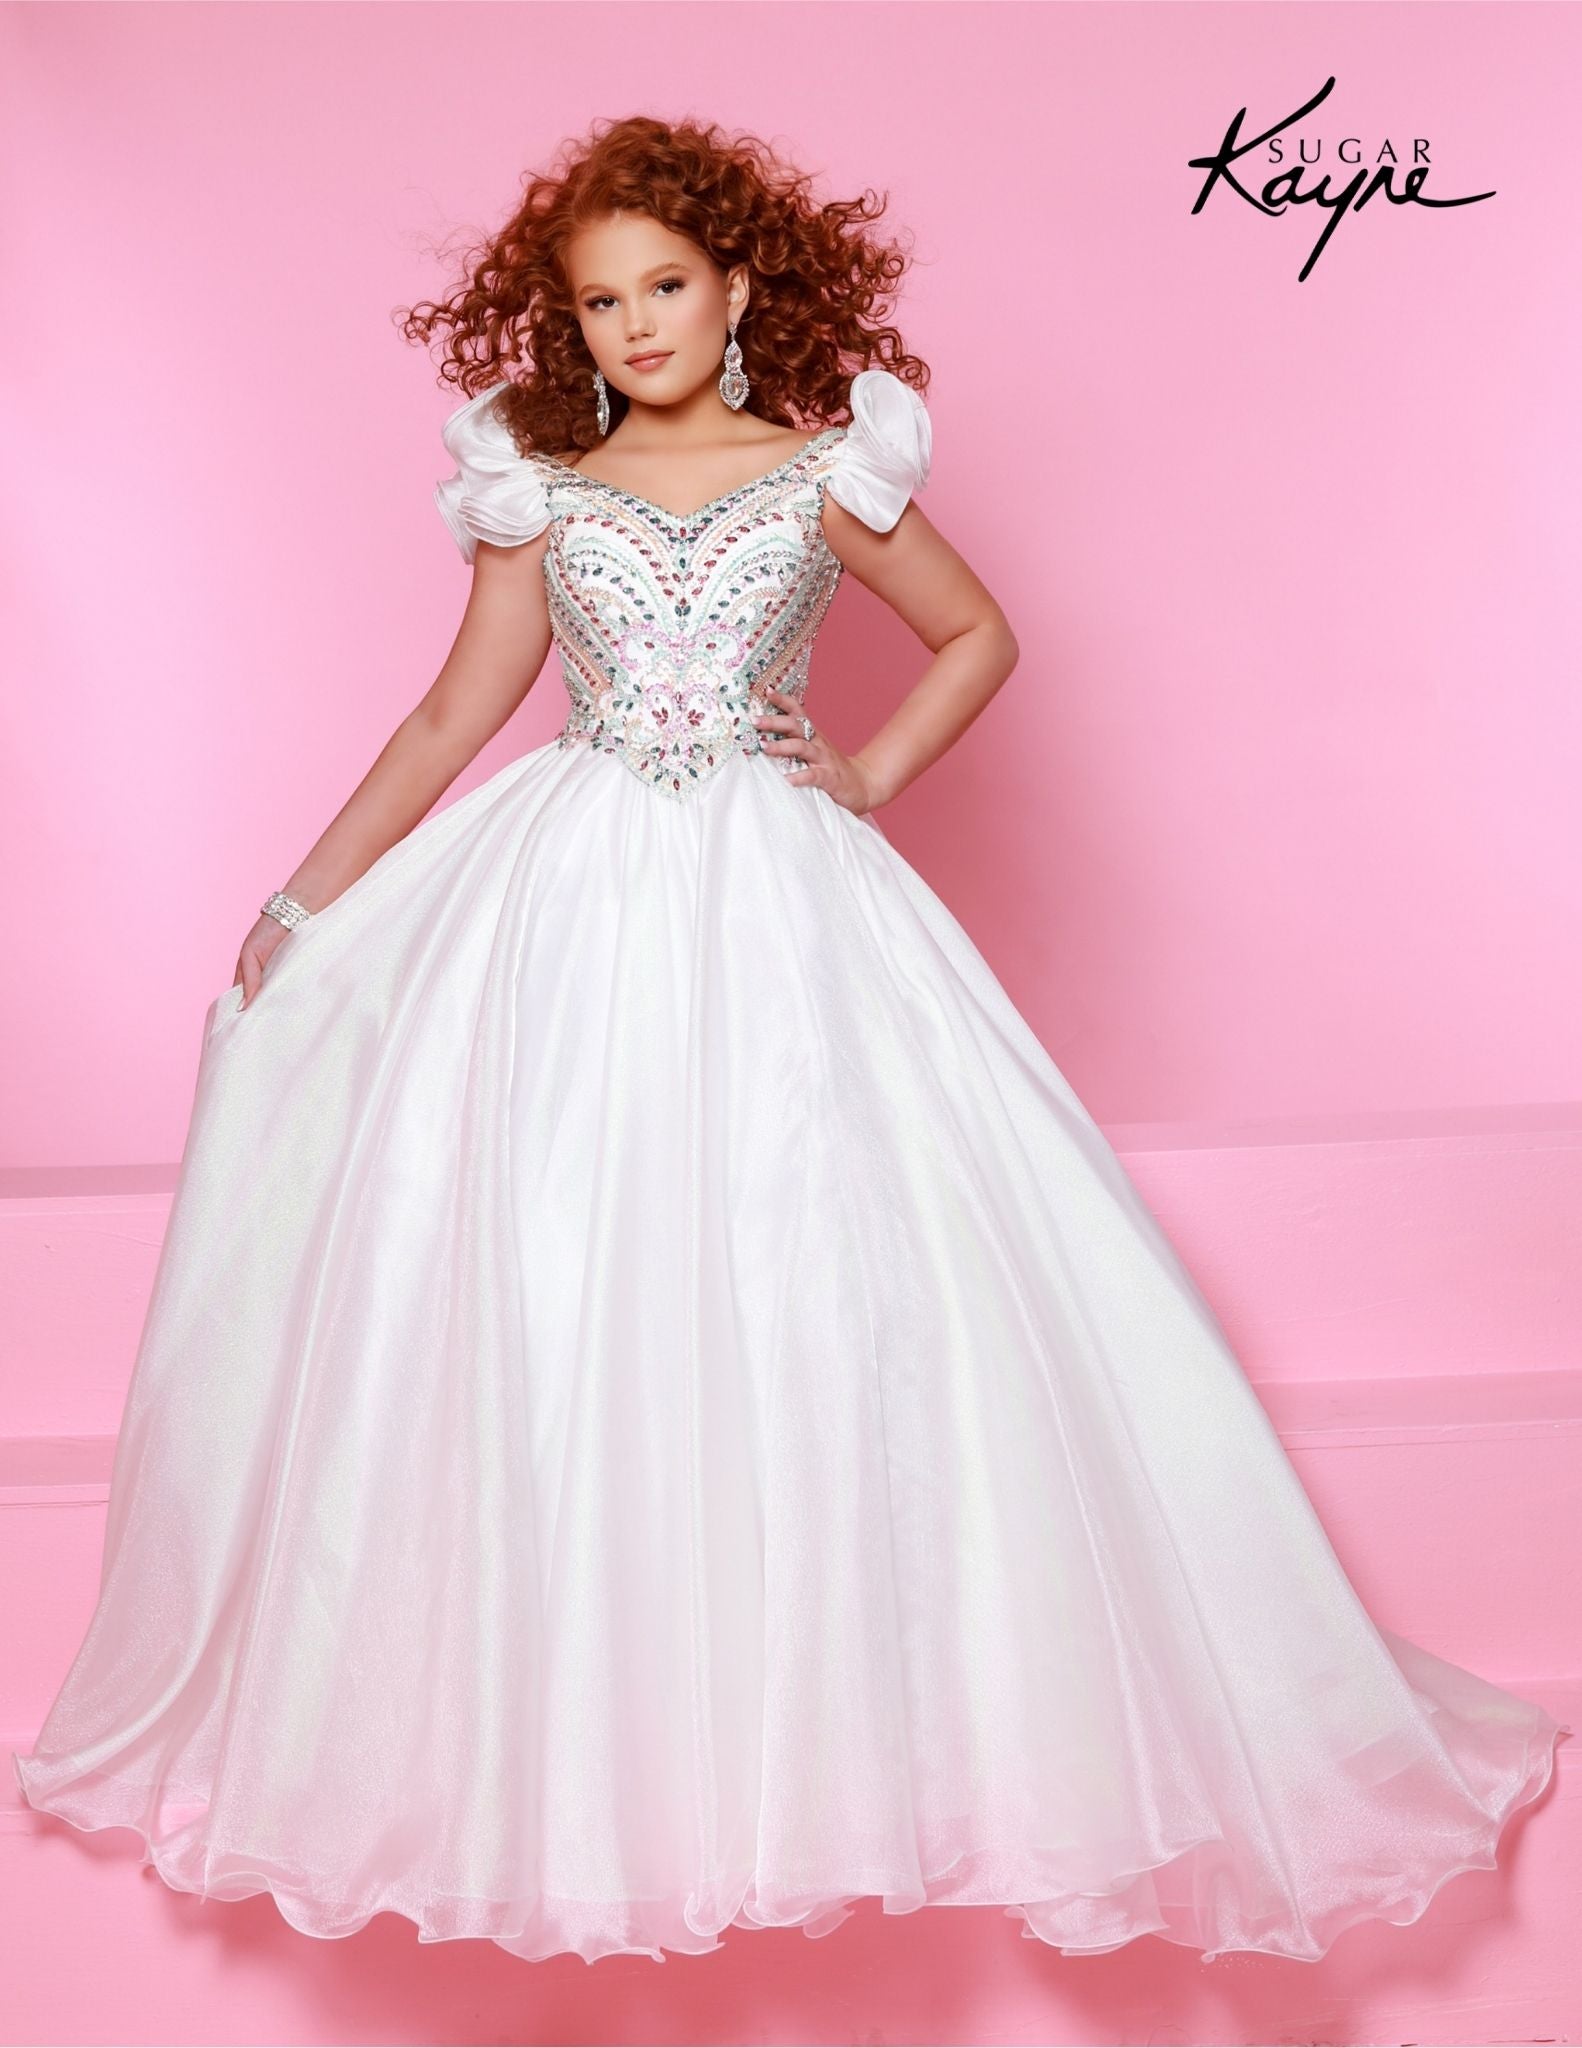 Bring out her inner beauty with this Sugar Kayne C334 Girls Pageant Dress. This luxurious dress is made from iridescent organza and features a sweetheart neckline and long ball gown skirt. Perfect for any special occasion. Transform into a twinkling starlet with this Metallic Organza Gown. The beaded bodice adds a touch of sparkle to this enchanting ensemble. The delicate ruffle sleeves create a charming look!